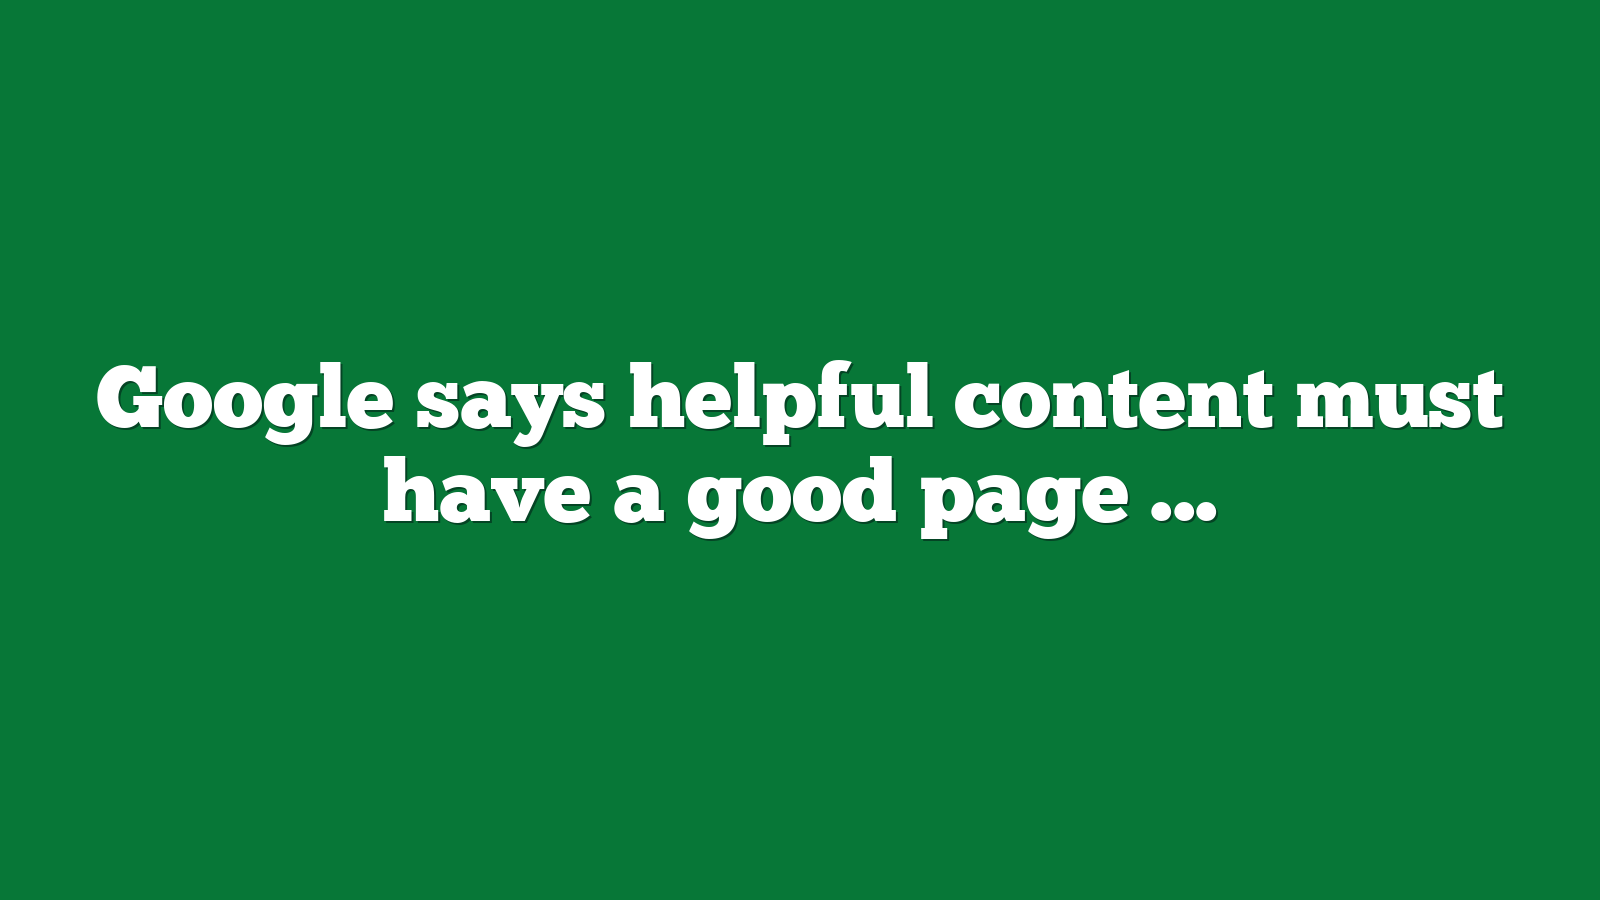 Google says helpful content must have a good page experience